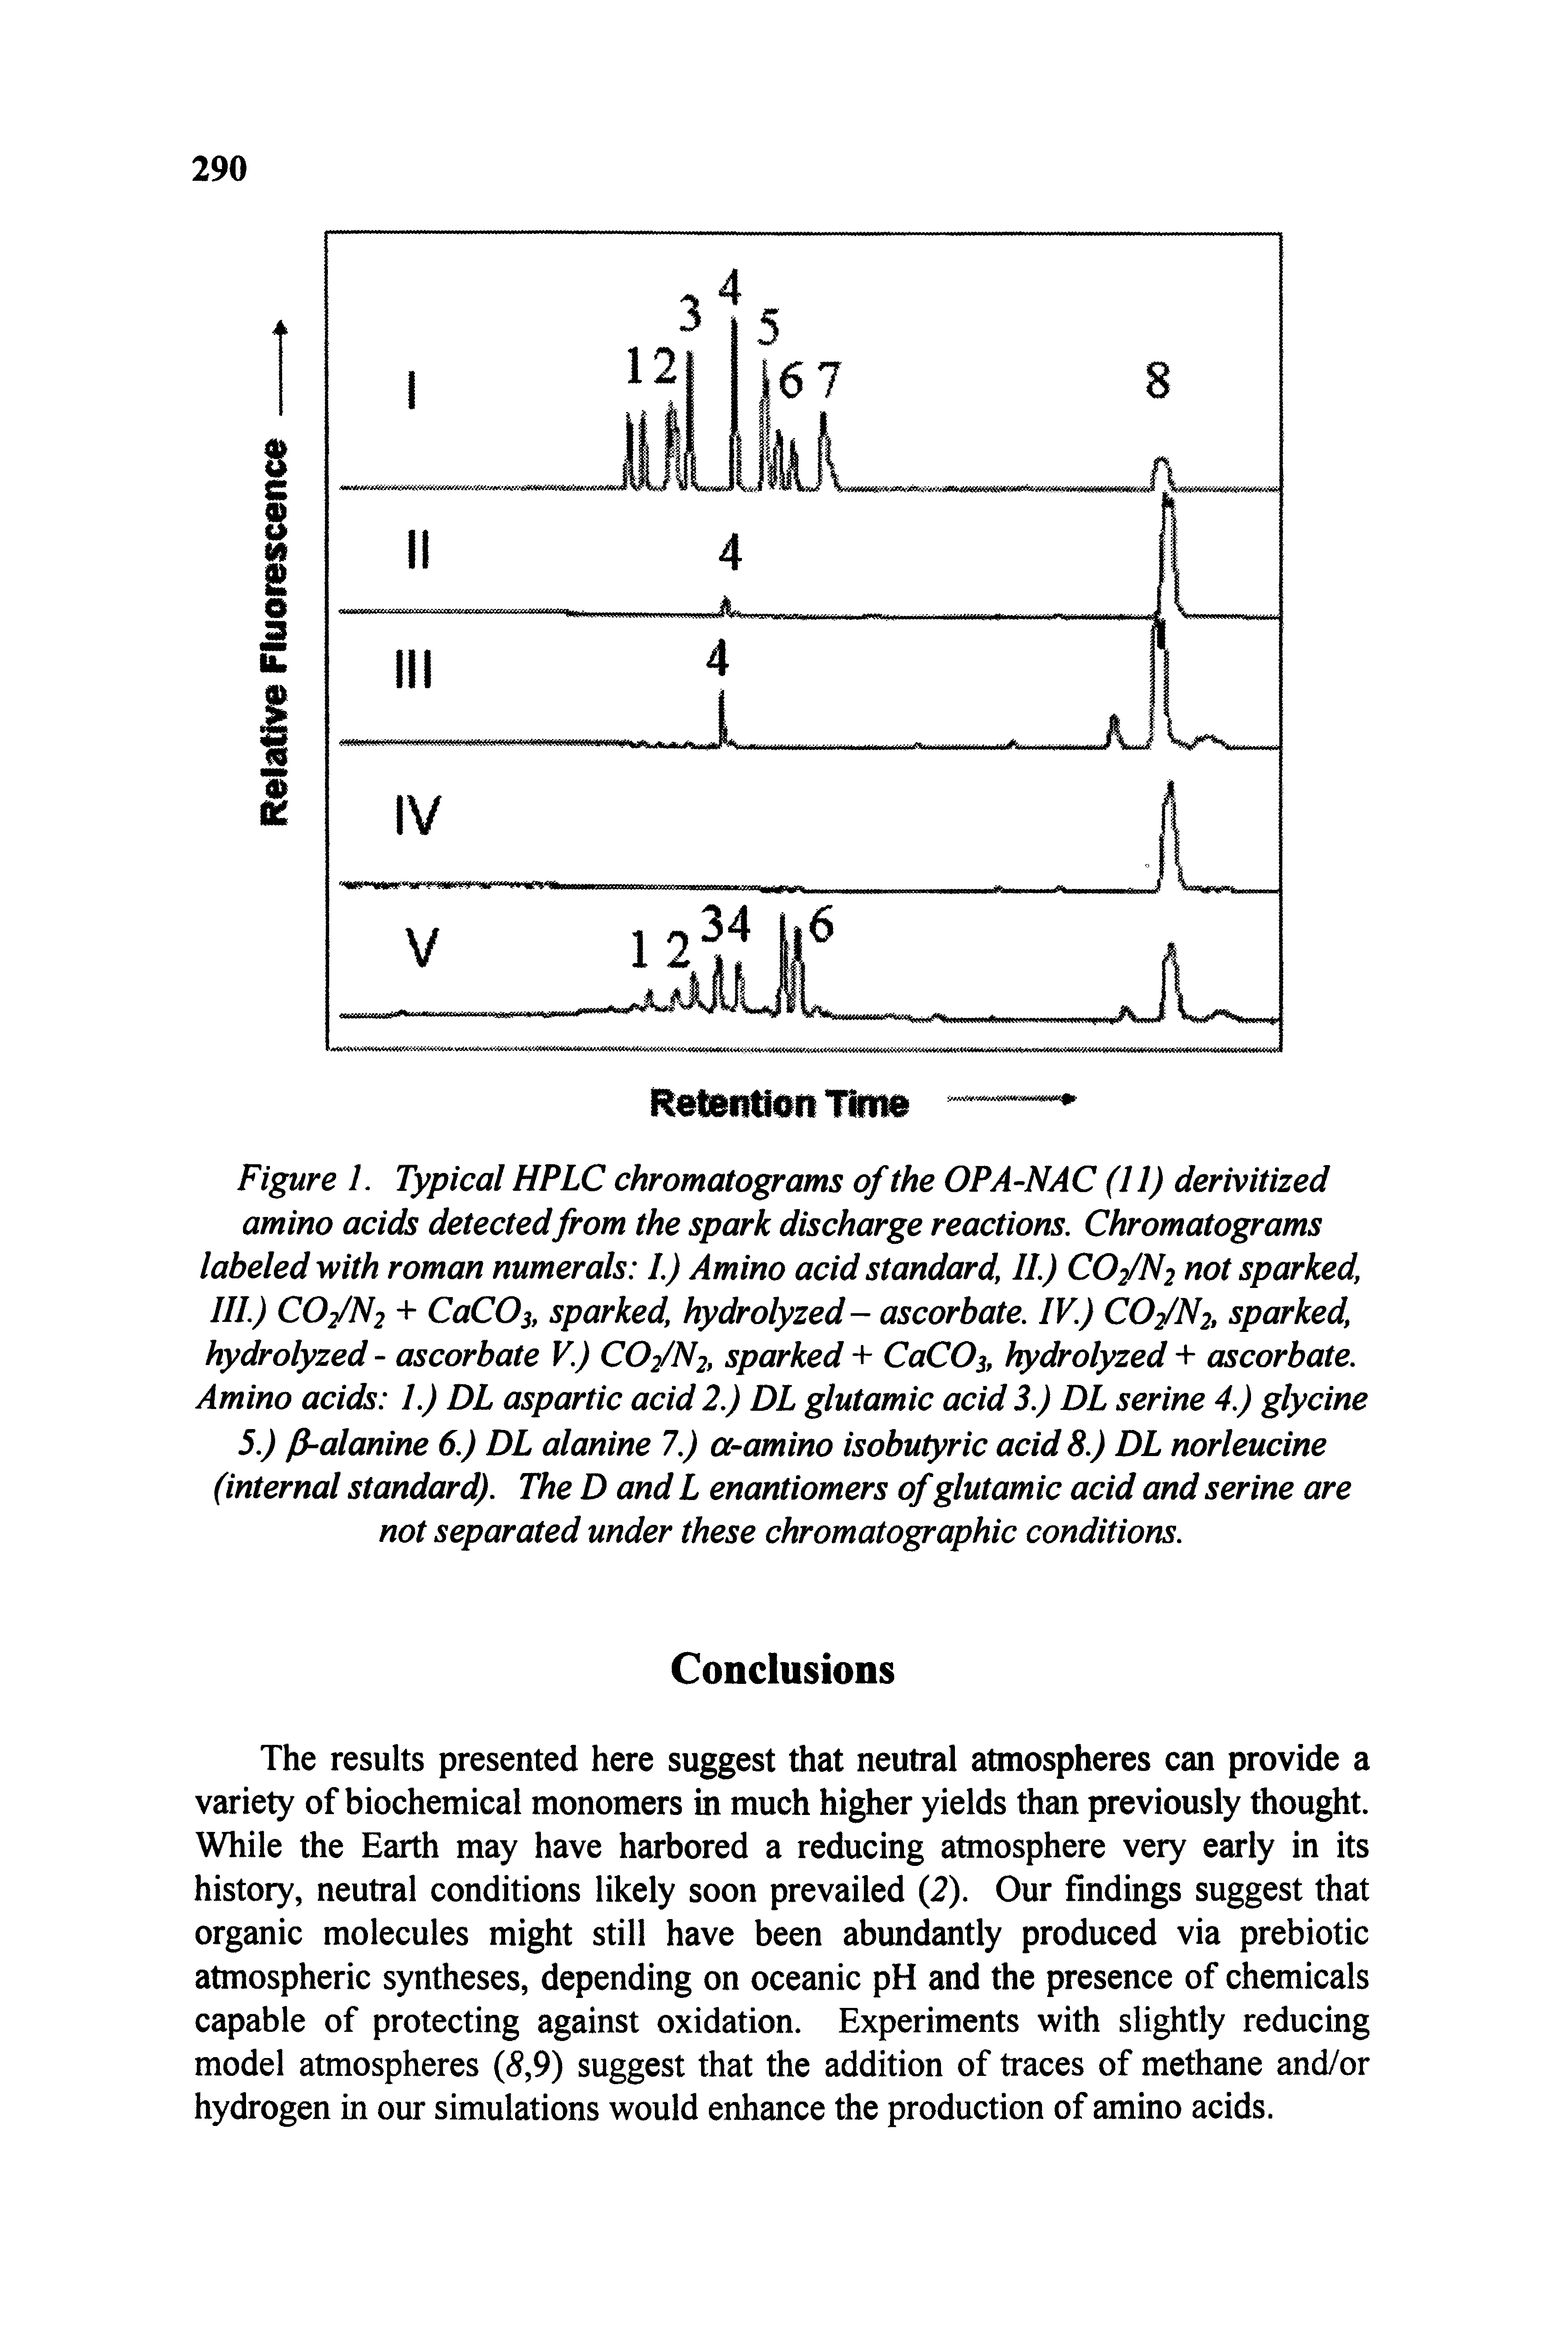 Figure 1. Typical HPLC chromatograms of the OPA-NAC (II) derivitized amino acids detected from the spark discharge reactions. Chromatograms labeled with roman numerals I.) Amino acid standard, II.) CO2/N2 not sparked, III.) CO2/N2 + CaCOs, sparked, hydrolyzed- ascorbate. IV.) CO2/N2, sparked, hydrolyzed - ascorbate V.) CO2/N2, sparked + CaCOs, hydrolyzed + ascorbate. Amino acids I.) DL aspartic acid 2.) DL glutamic acid 3.) DL serine 4.) glycine 5.) P-alanine 6.) DL alanine 7.) a-amino isobutyric acid 8.) DL norleucine (internal standard). The D and L enantiomers of glutamic acid and serine are not separated under these chromatographic conditions.